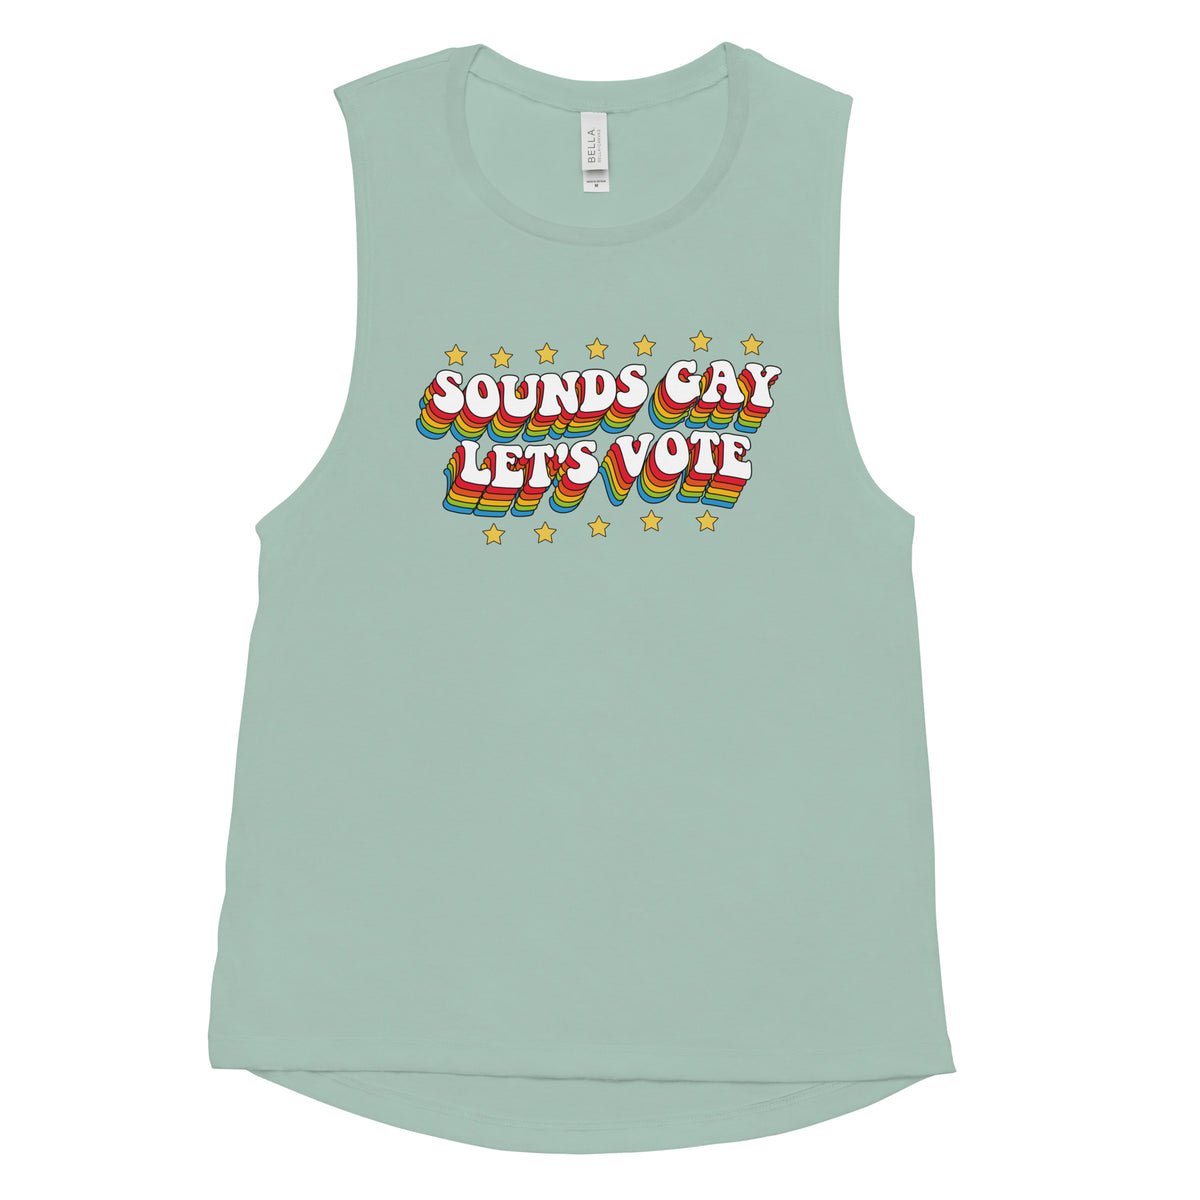 Sounds Gay Let's Vote Women's Muscle Tank